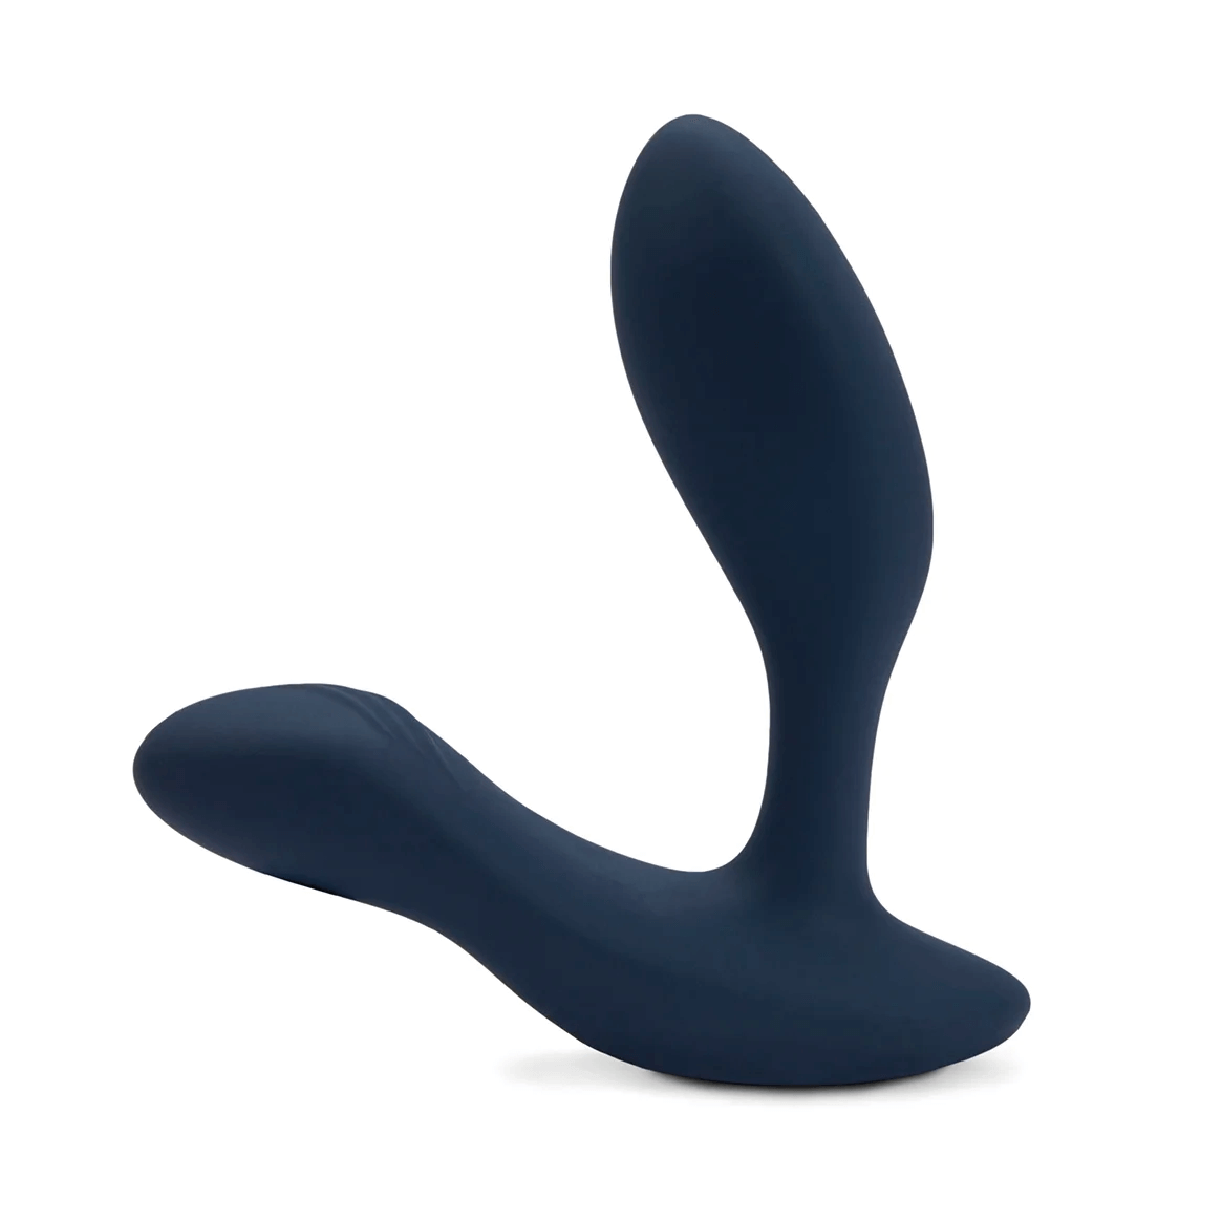 The vibrating prostate massager Vector by We-Vibe - Product image